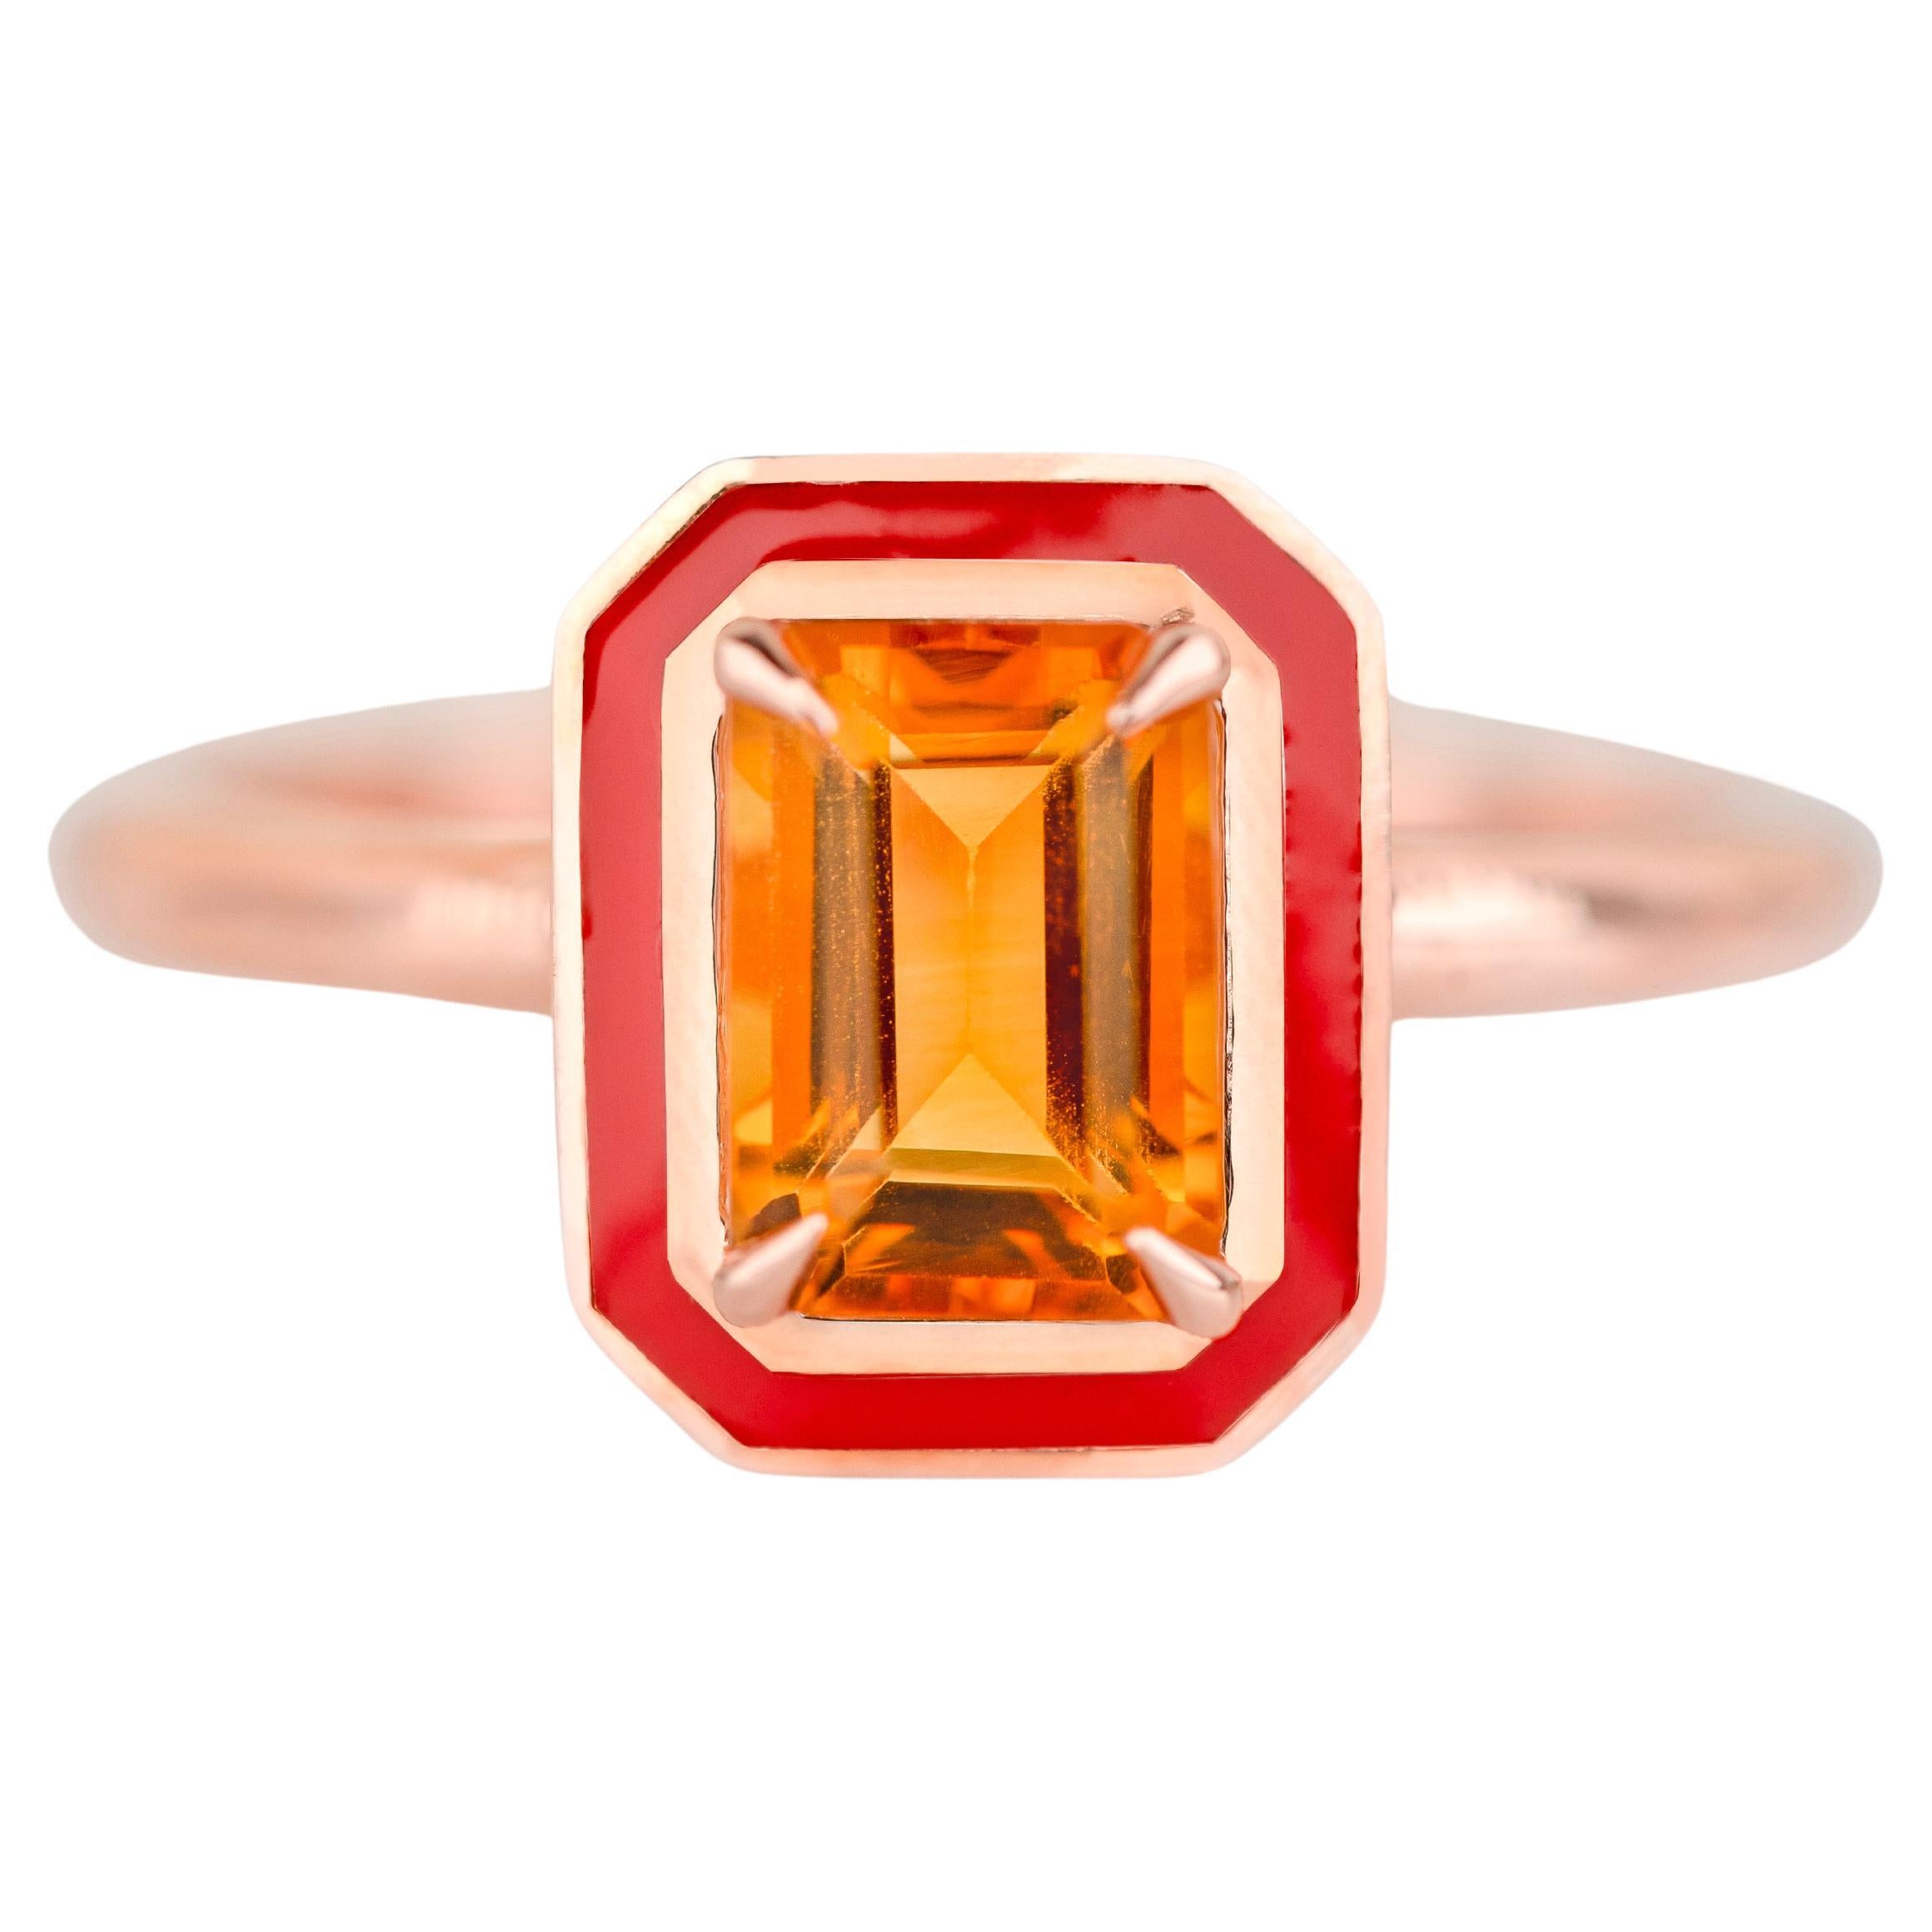 Art Deco Style, 0.90-1.00 Ct Citrine Stone and Colorful Enamel, 14K Gold Ring For Sale